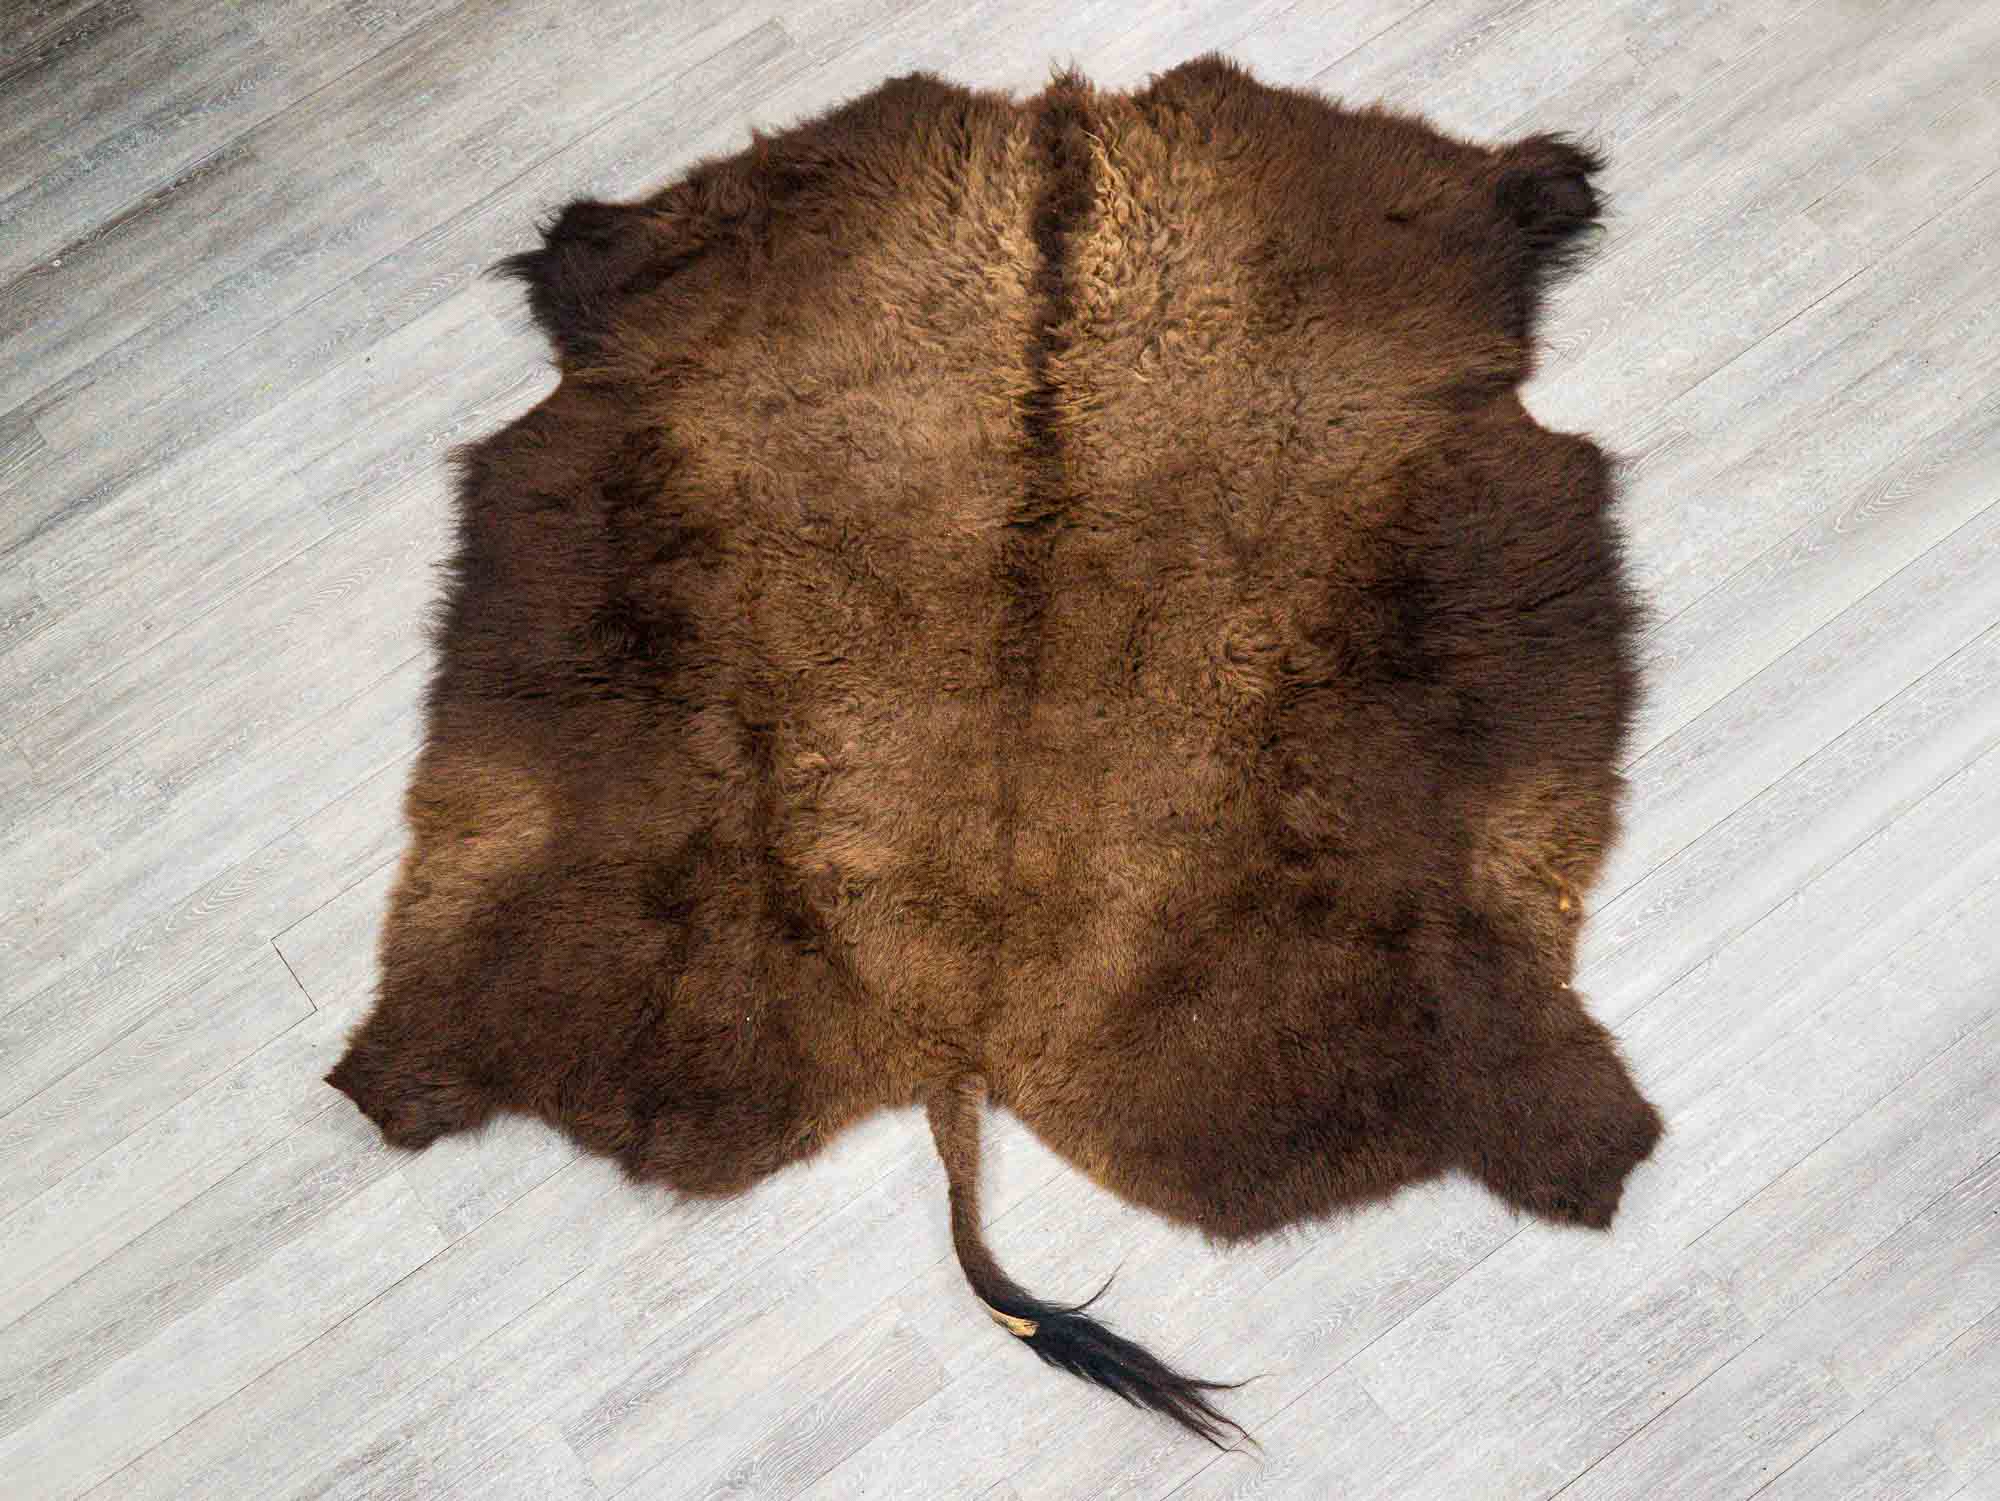 Hand Painted Brain Tanned Buffalo Hide: Gallery Item - 149-1-G6019 (10UB10)